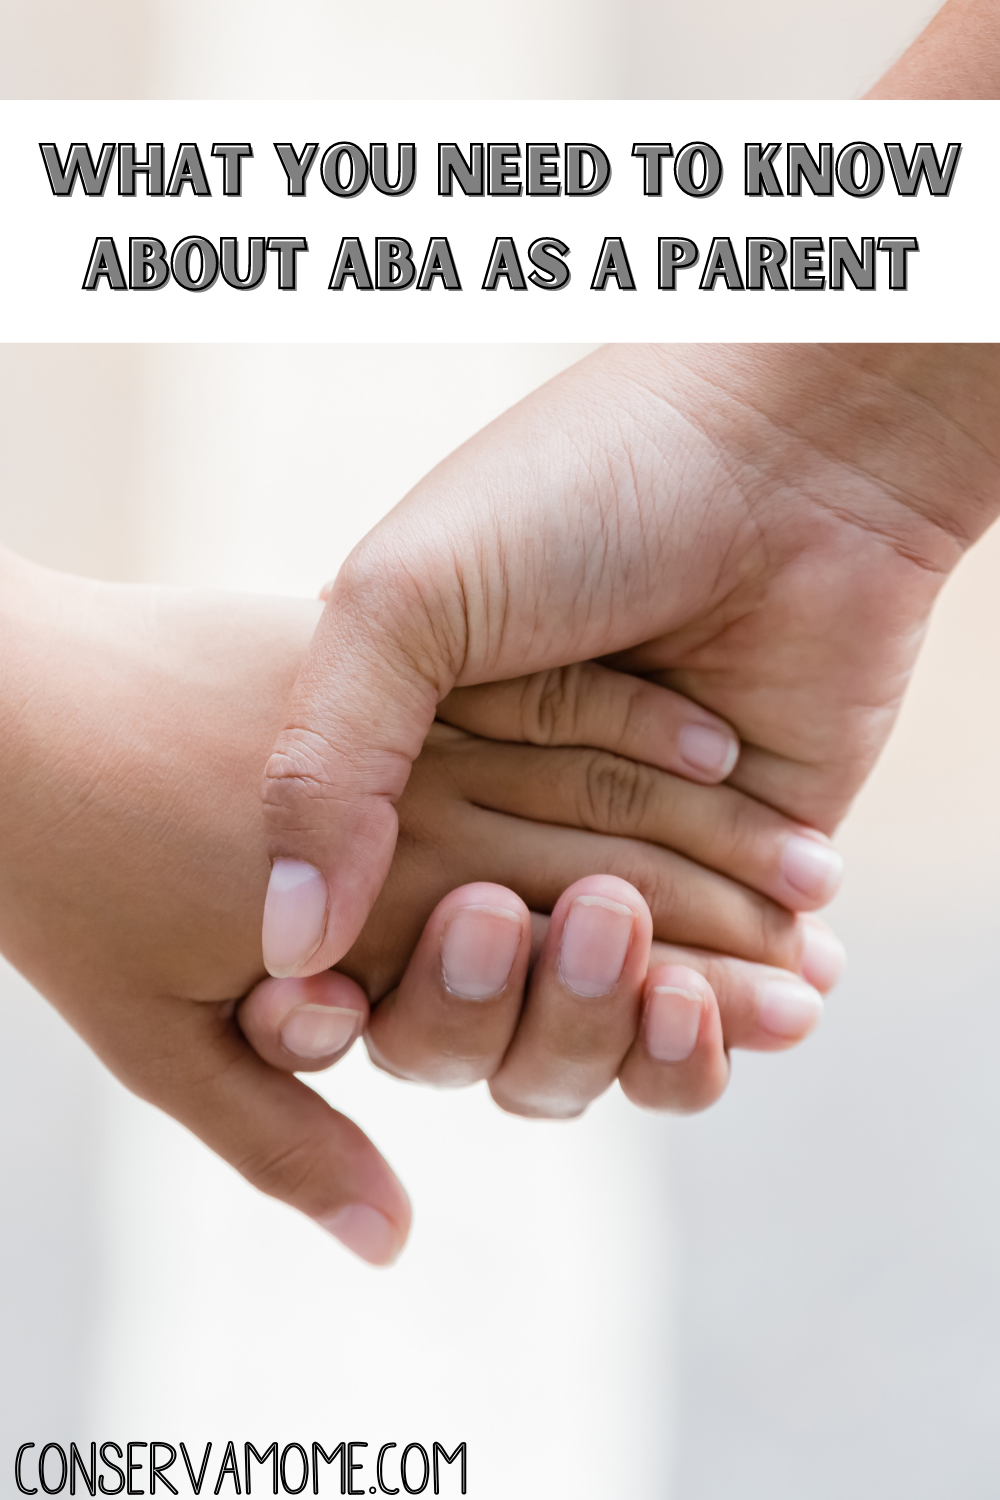 What you need to know about ABA as a Parent